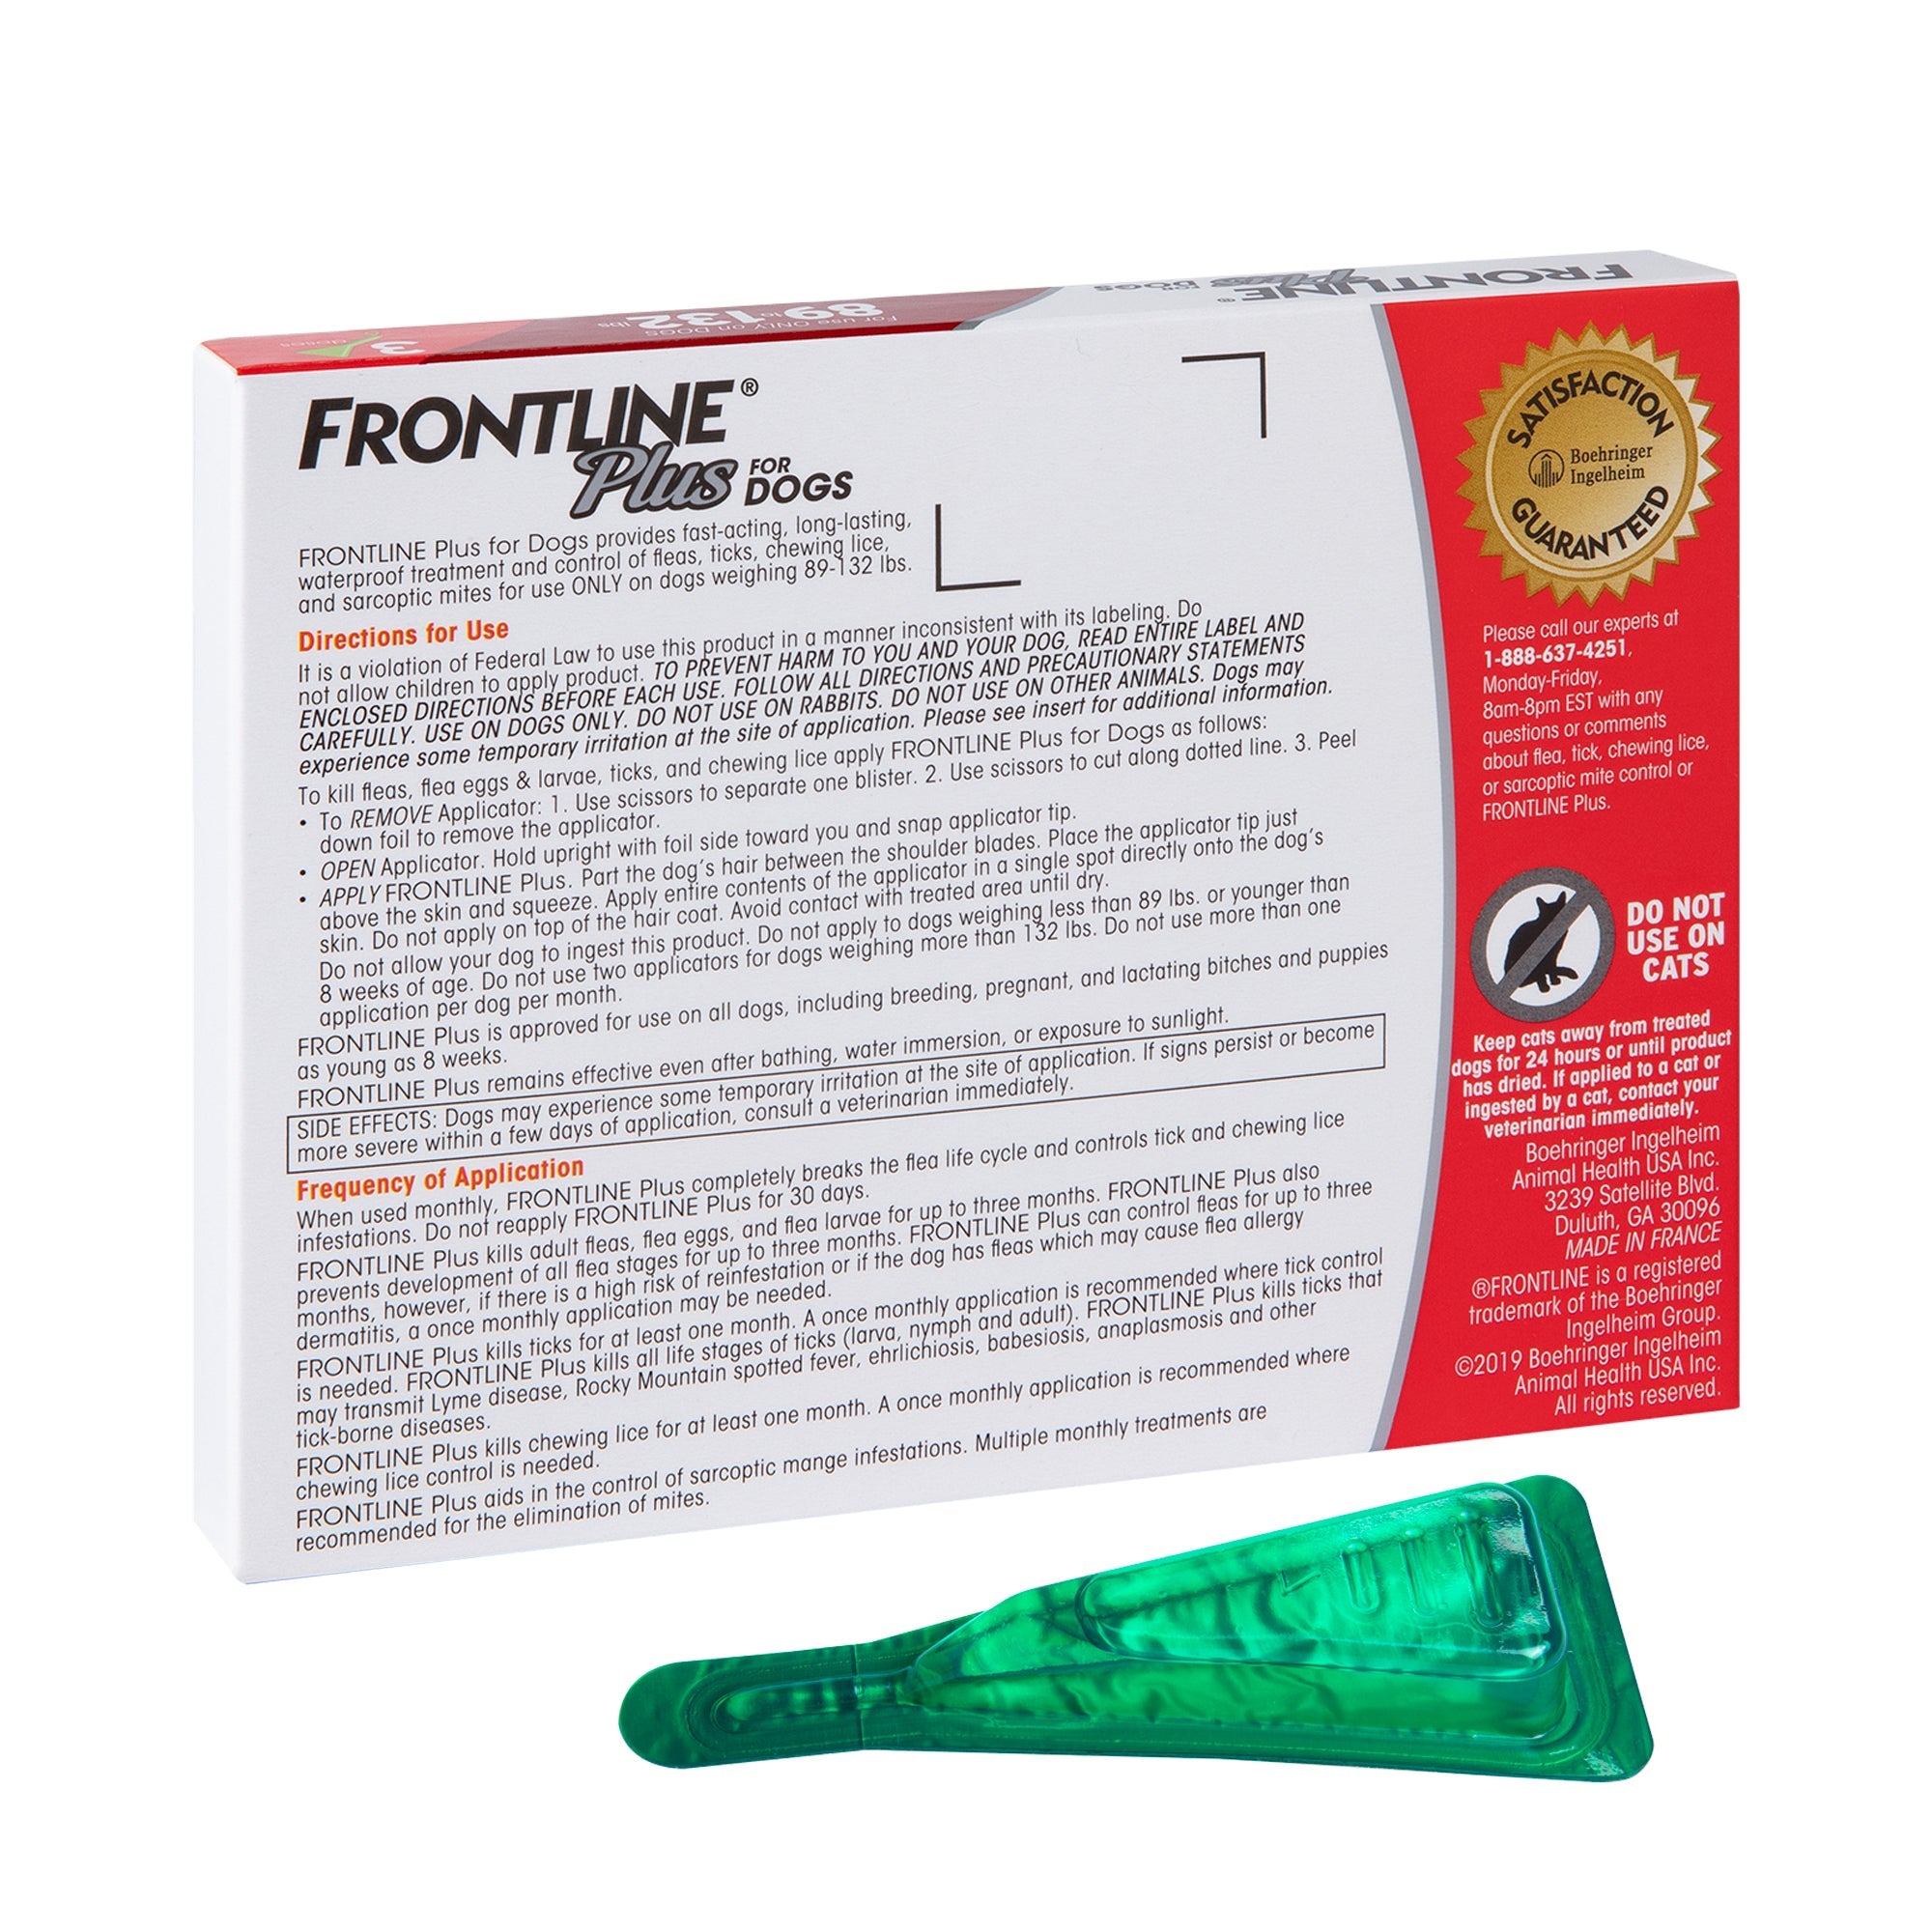 Frontline Plus Flea and Tick Treatment for Dogs, Small Dogs 5-22 Lbs, 6 Doses)